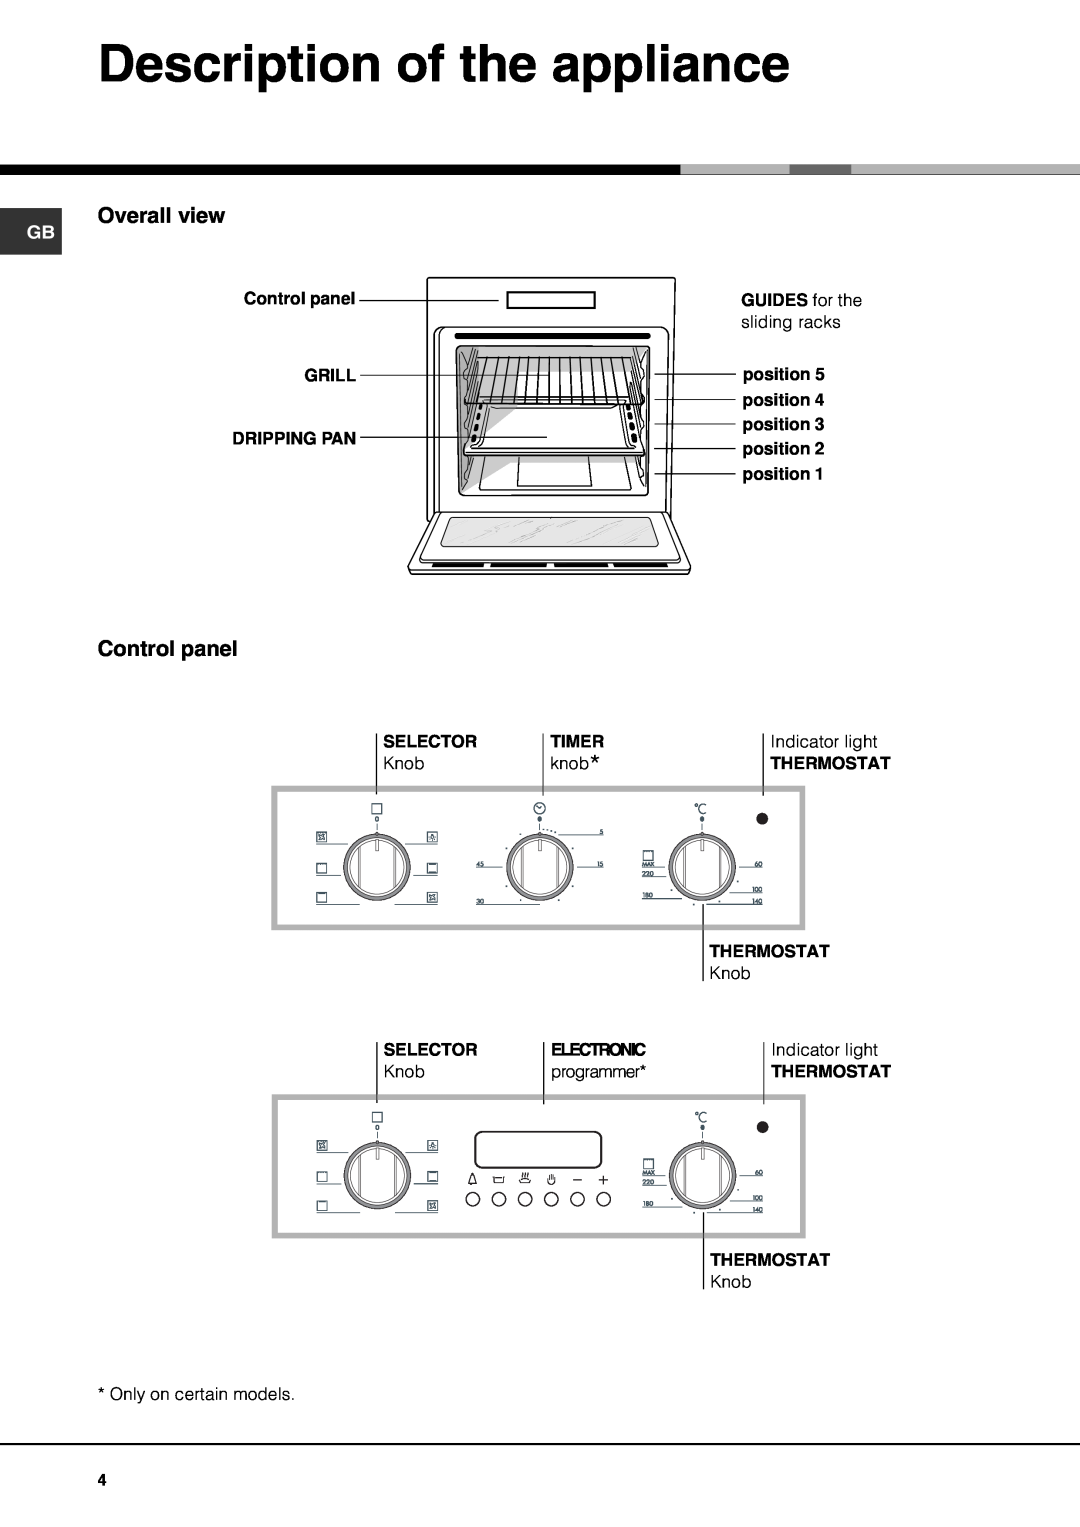 Hotpoint SY10, SY56X, X SY51, SY51X operating instructions Description of the appliance, Overall view, Control panel 